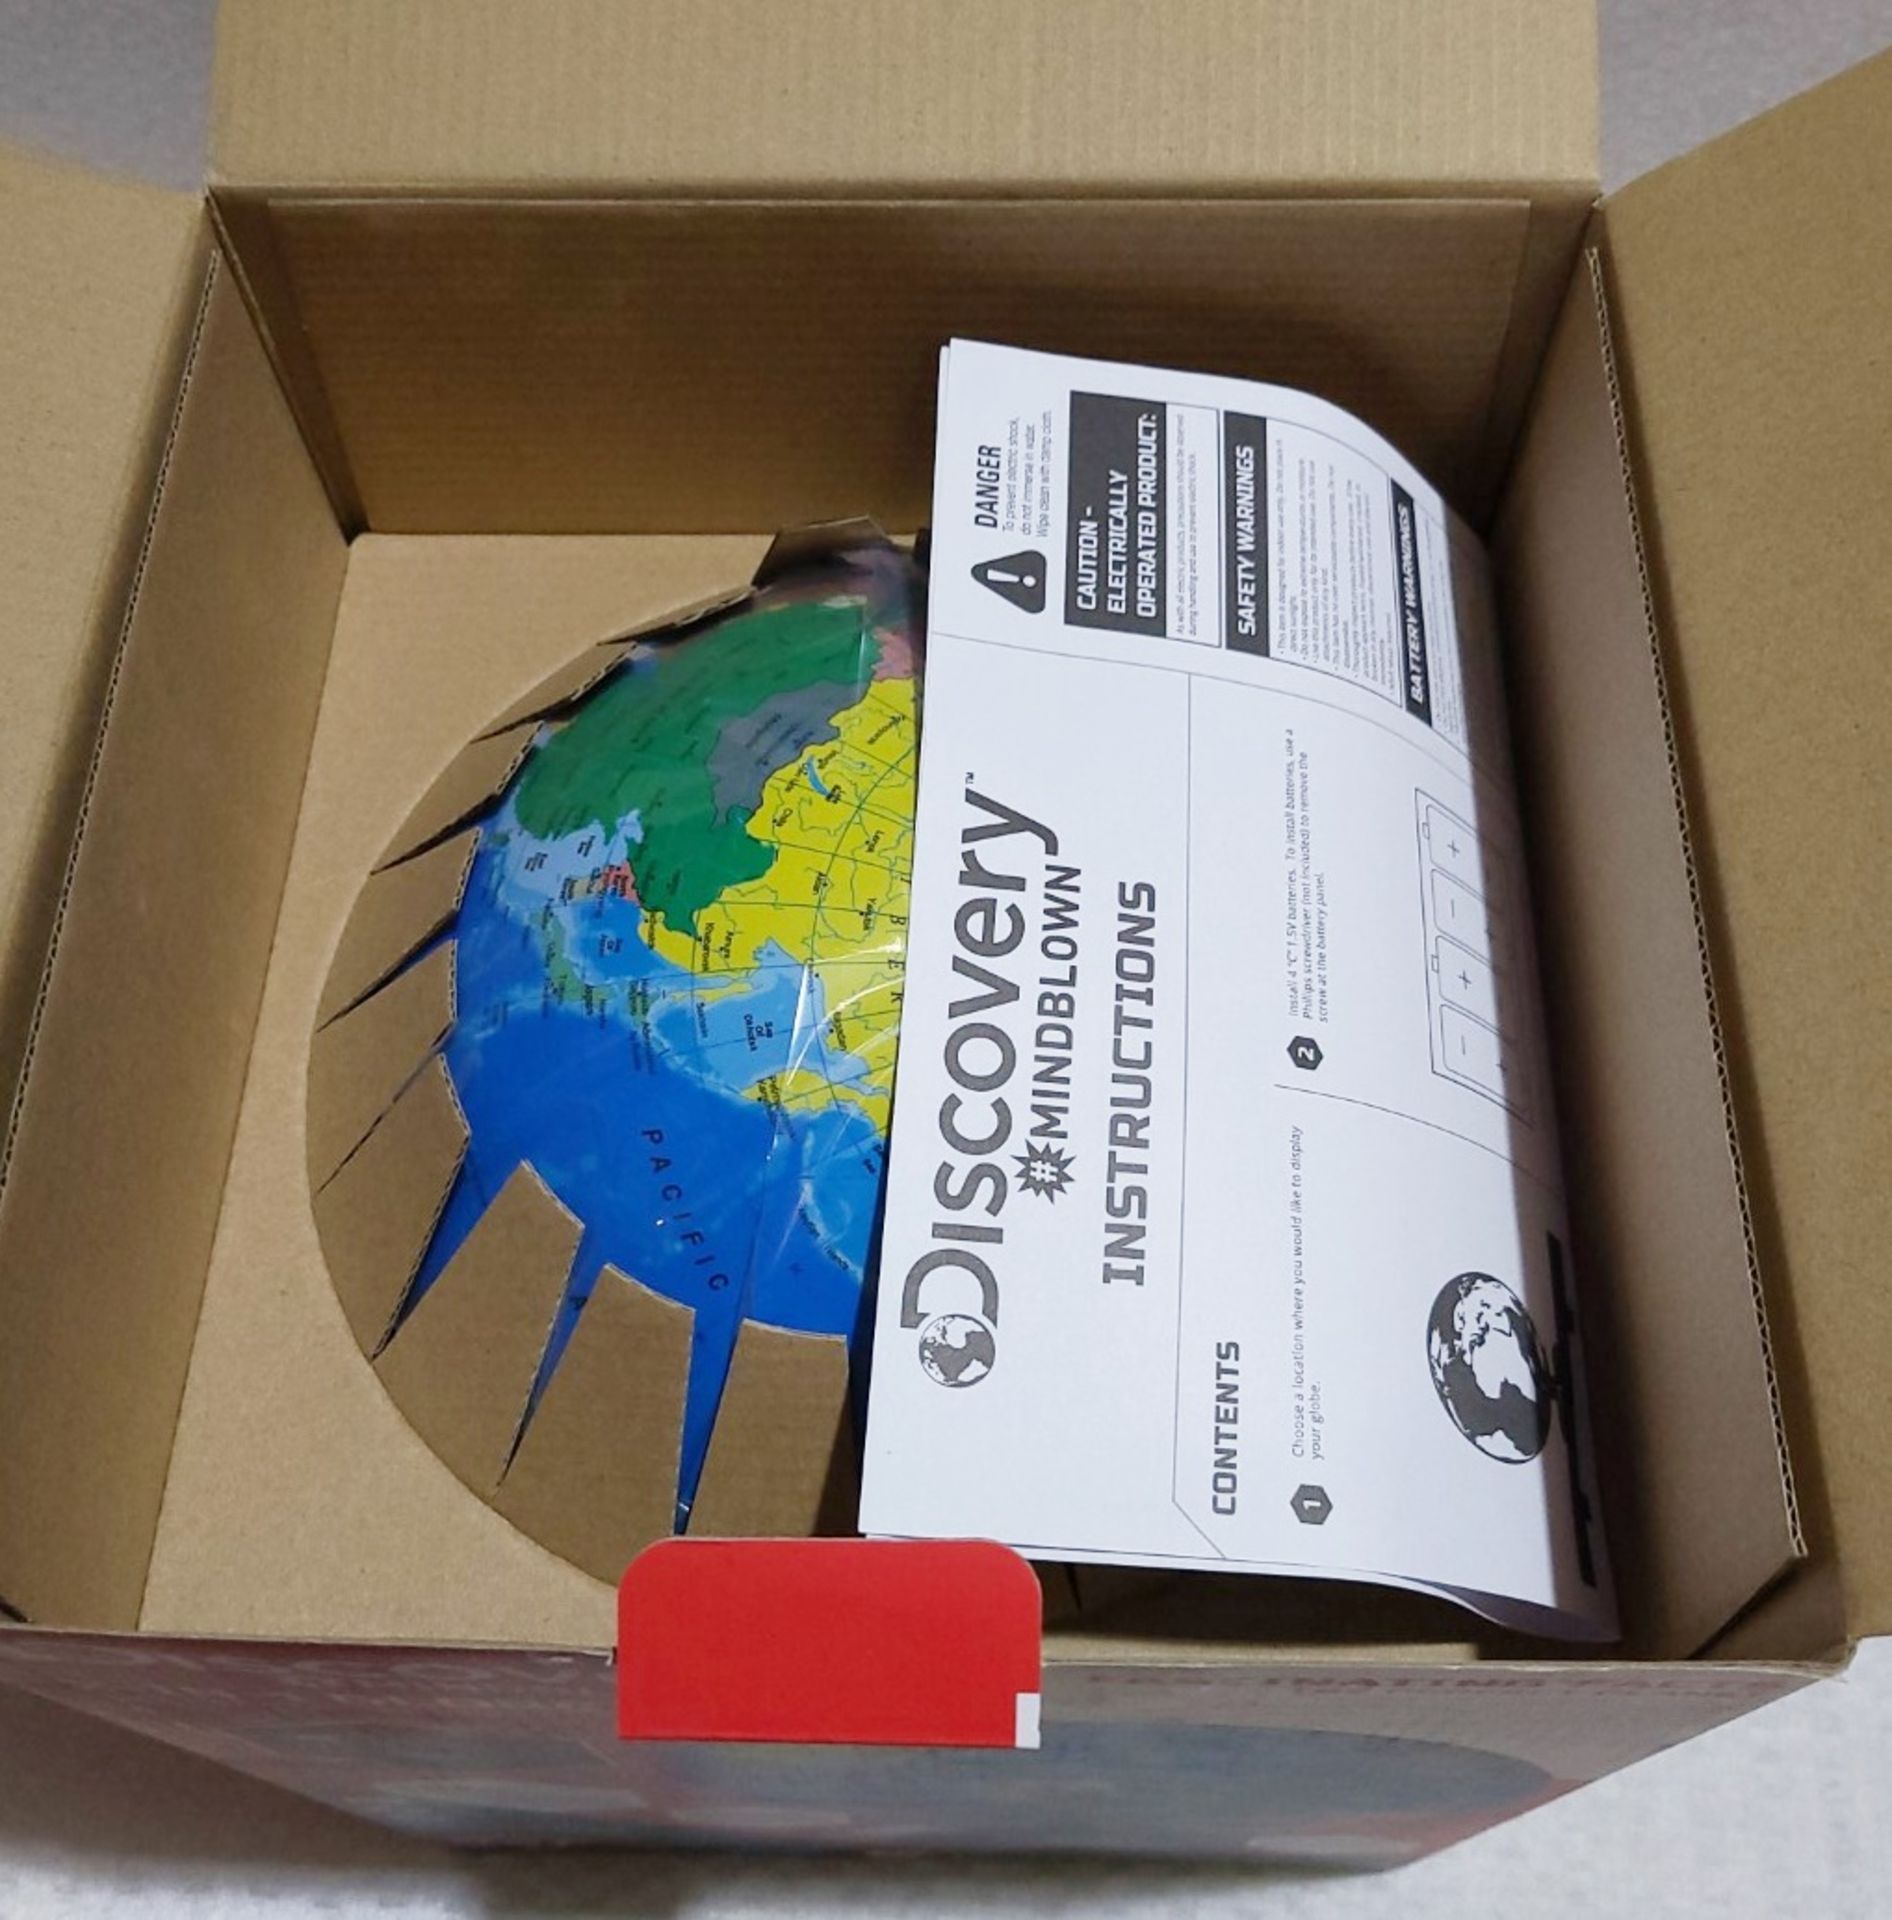 1 x DISCOVERY Kids 2-In-1 World Globe Led Lamp With Day & Night Modes - New / Unused Boxed Stock - Image 2 of 7